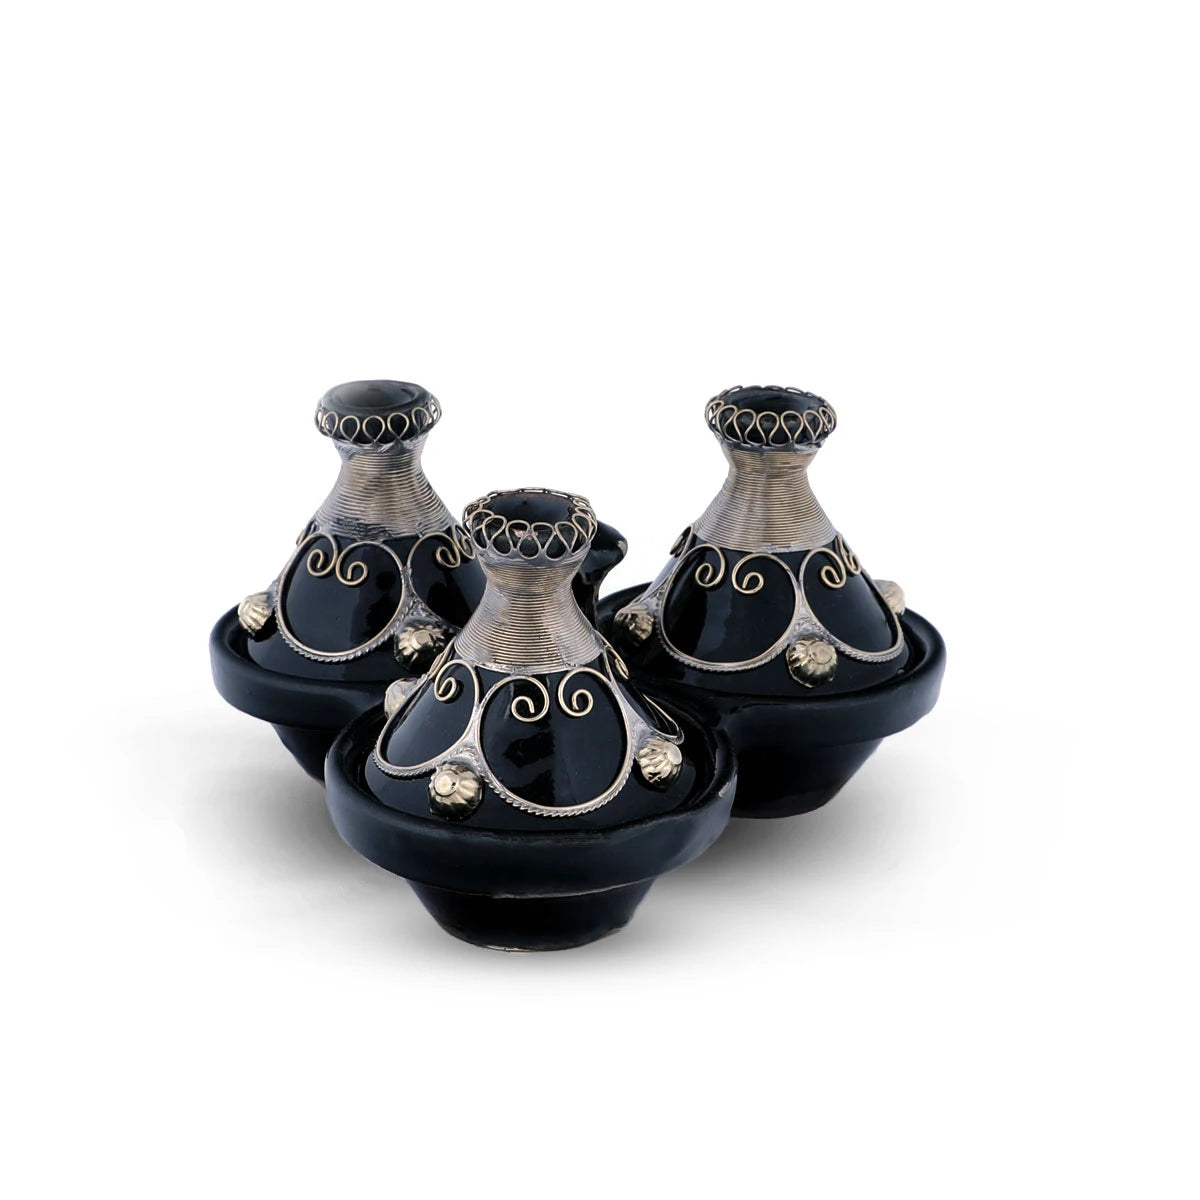 Flat View of Blue Colored Three Moroccan Tagine Set with closed lids